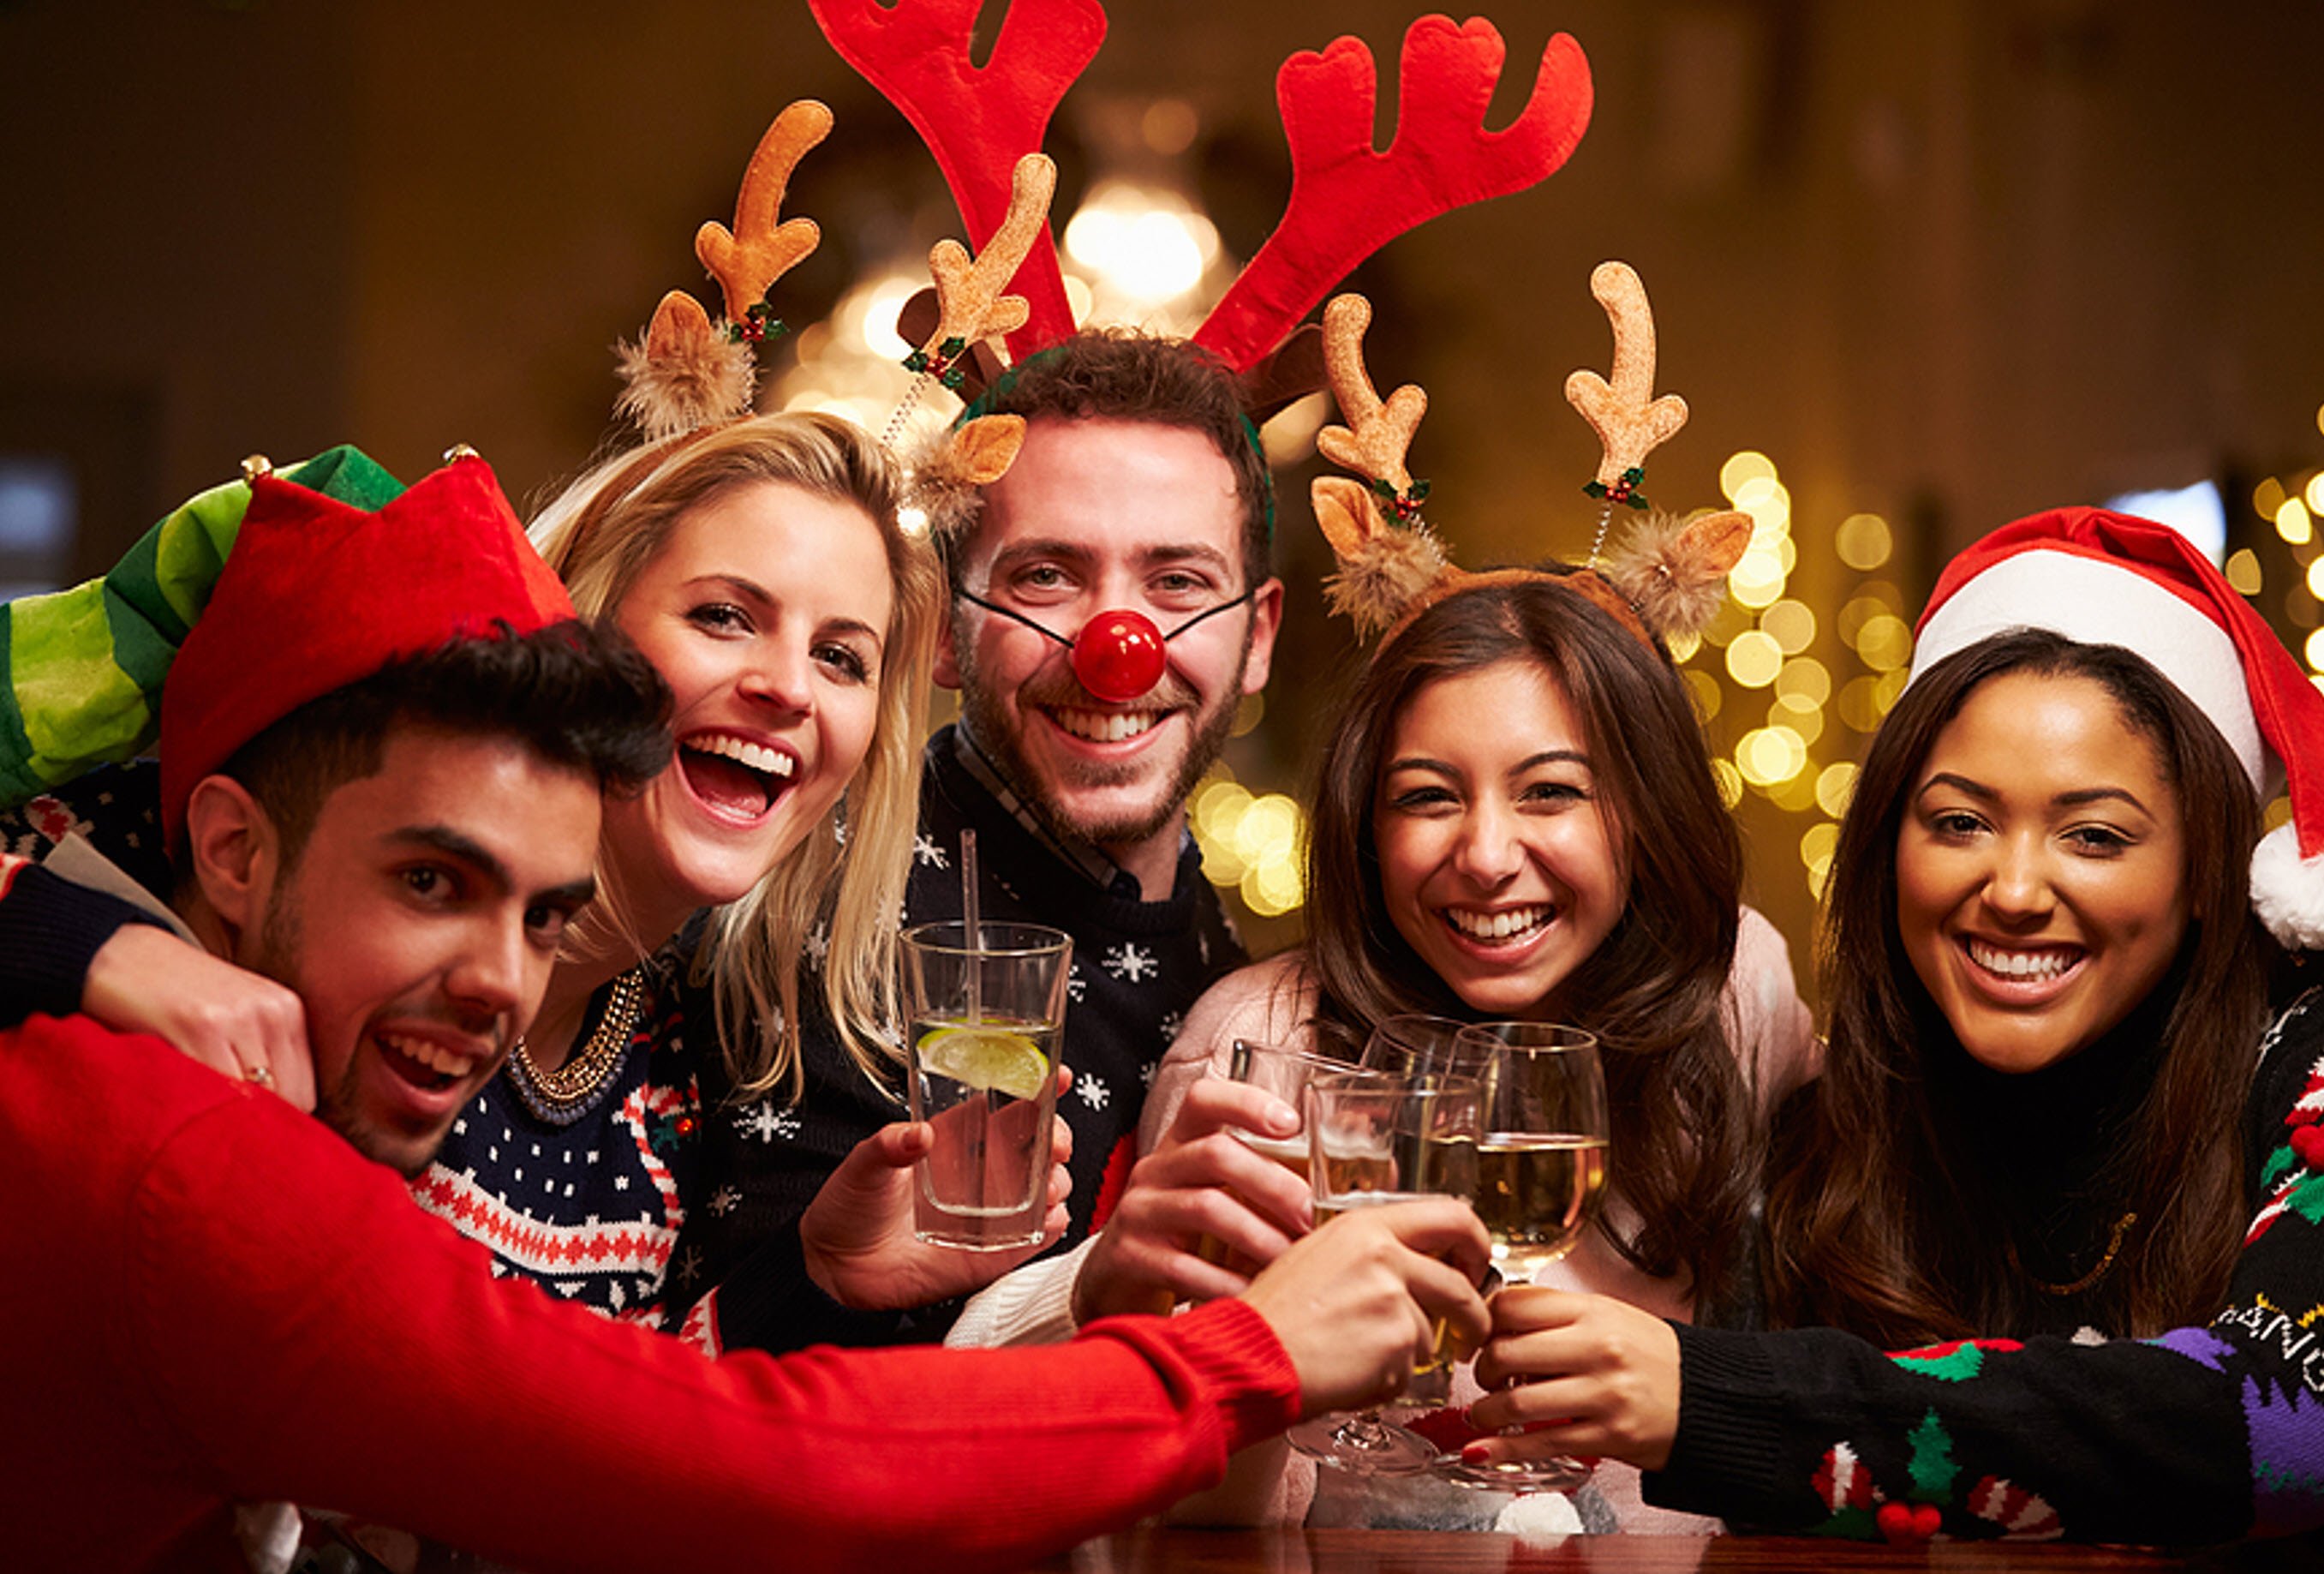 Bar and Restaurant Holiday Trends and Strategies